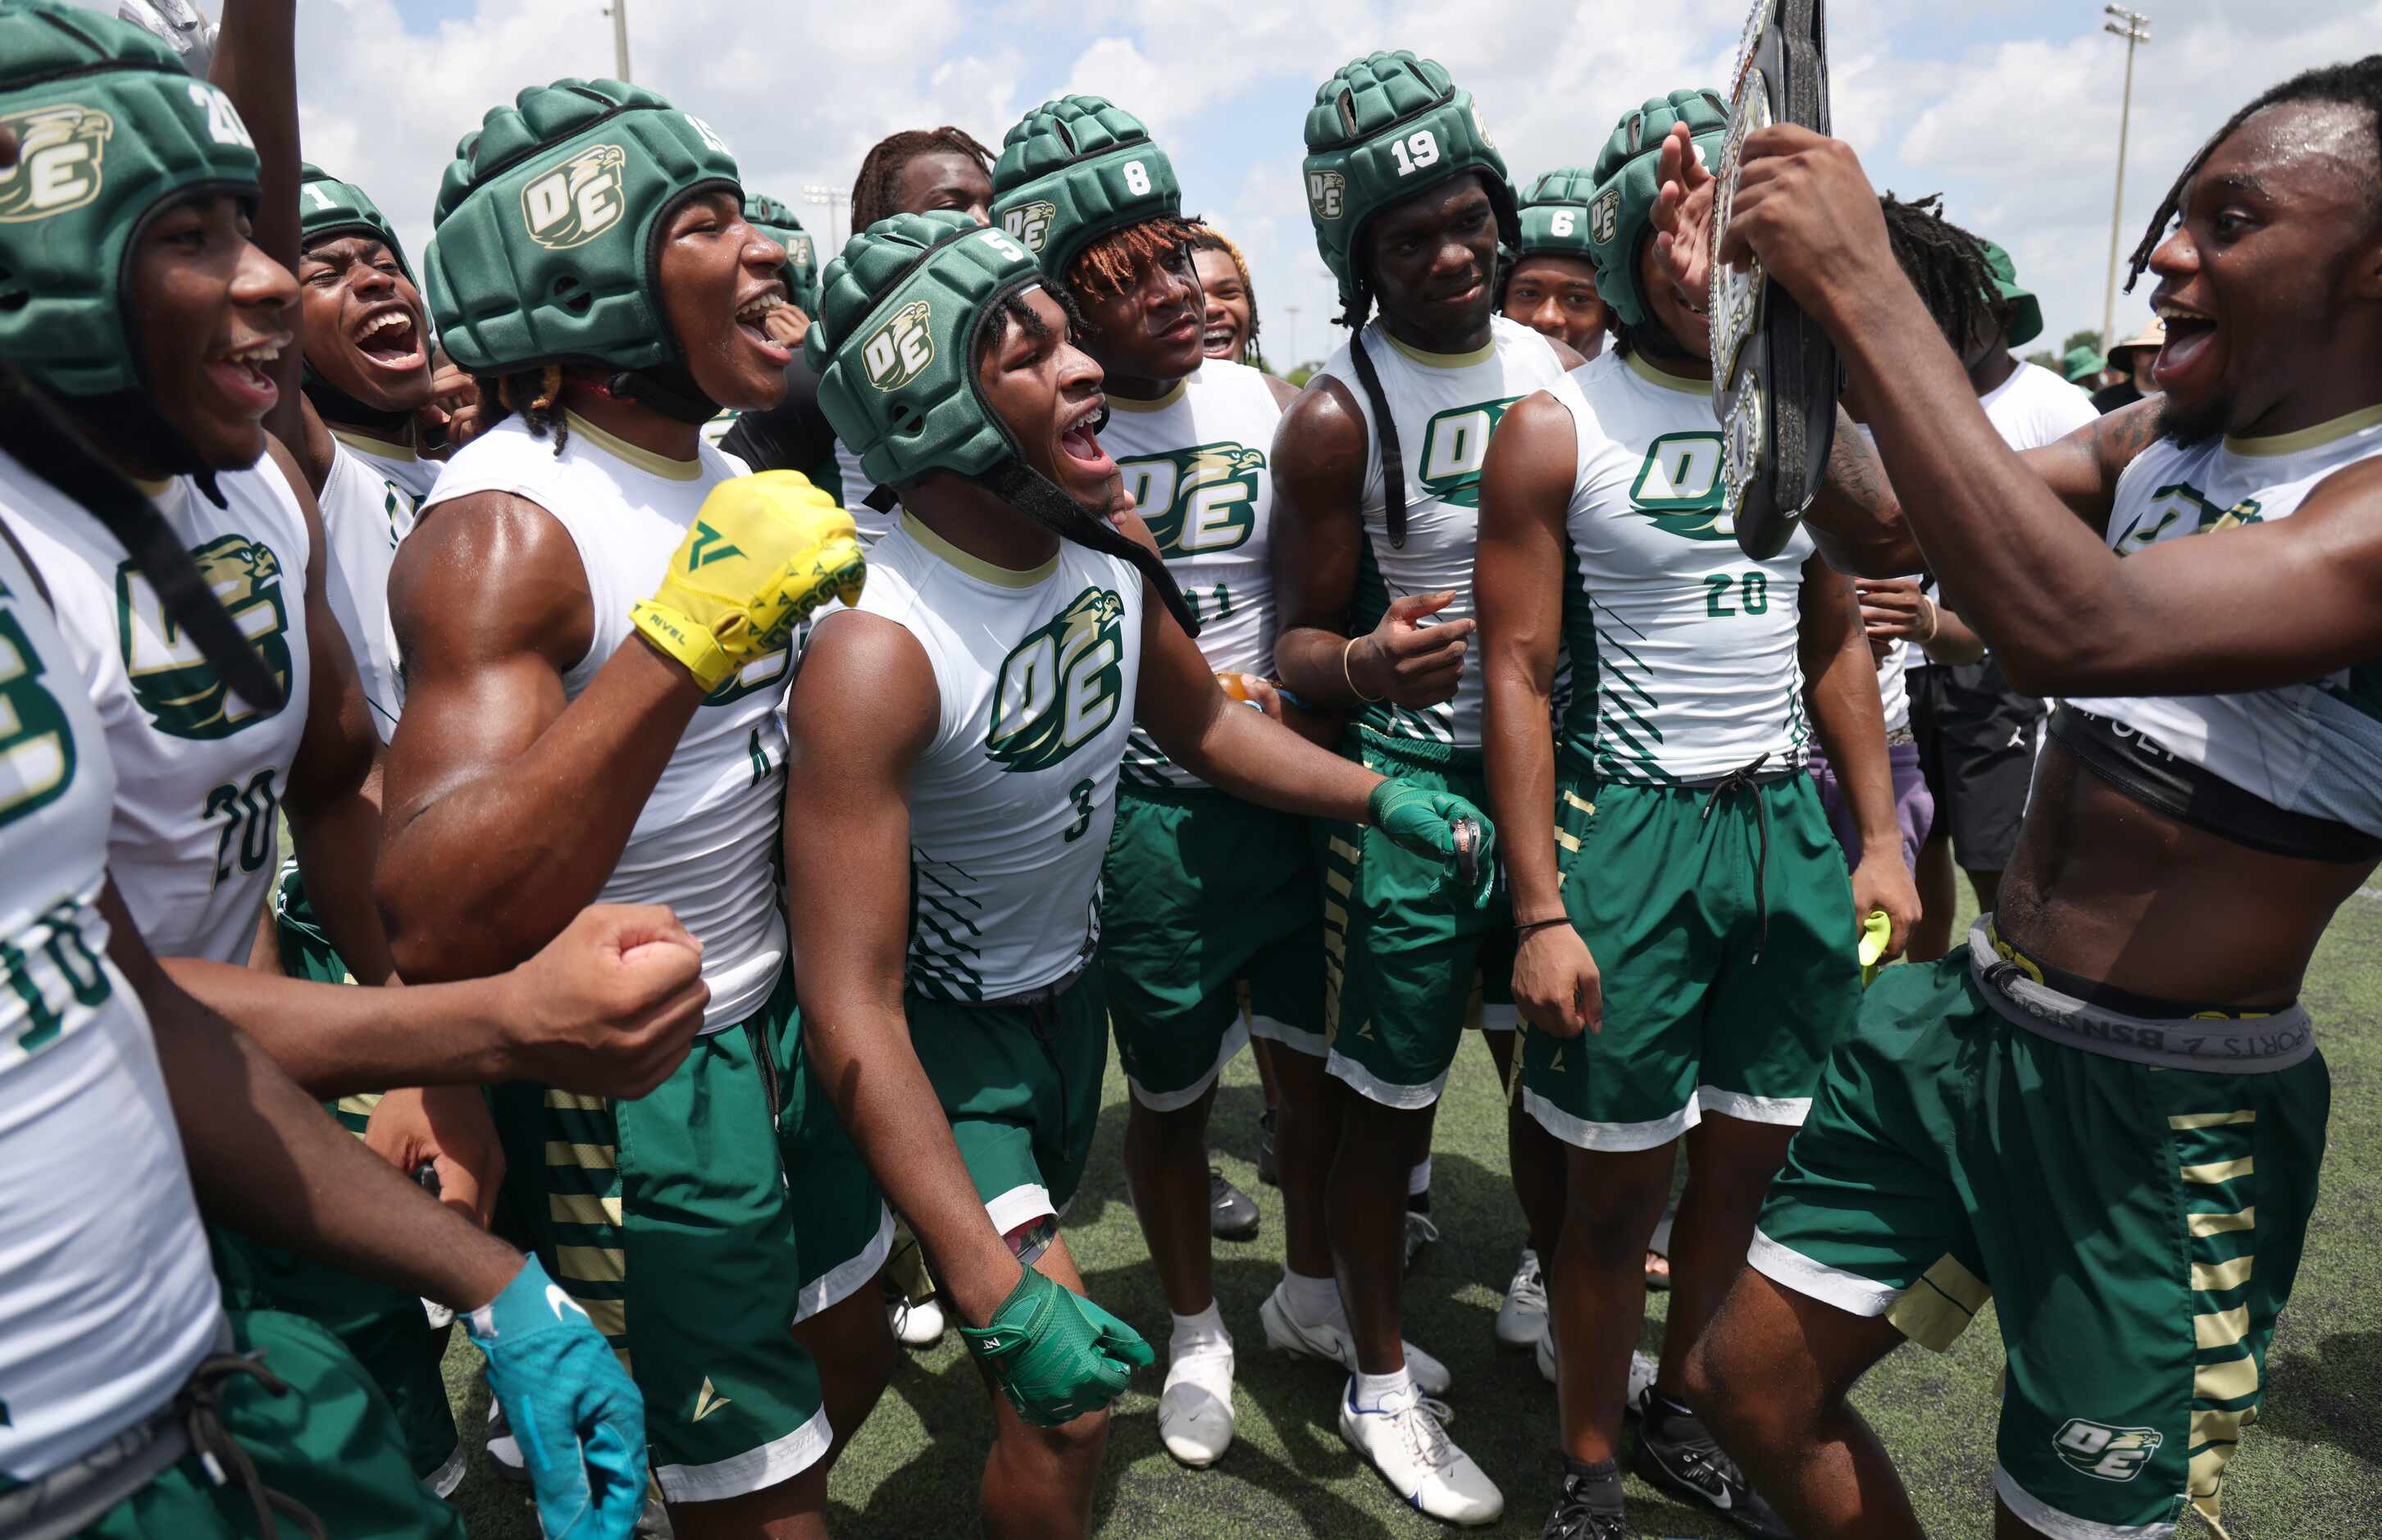 DeSoto players revel in the moment as they celebrate their 38-20 victory over Austin...